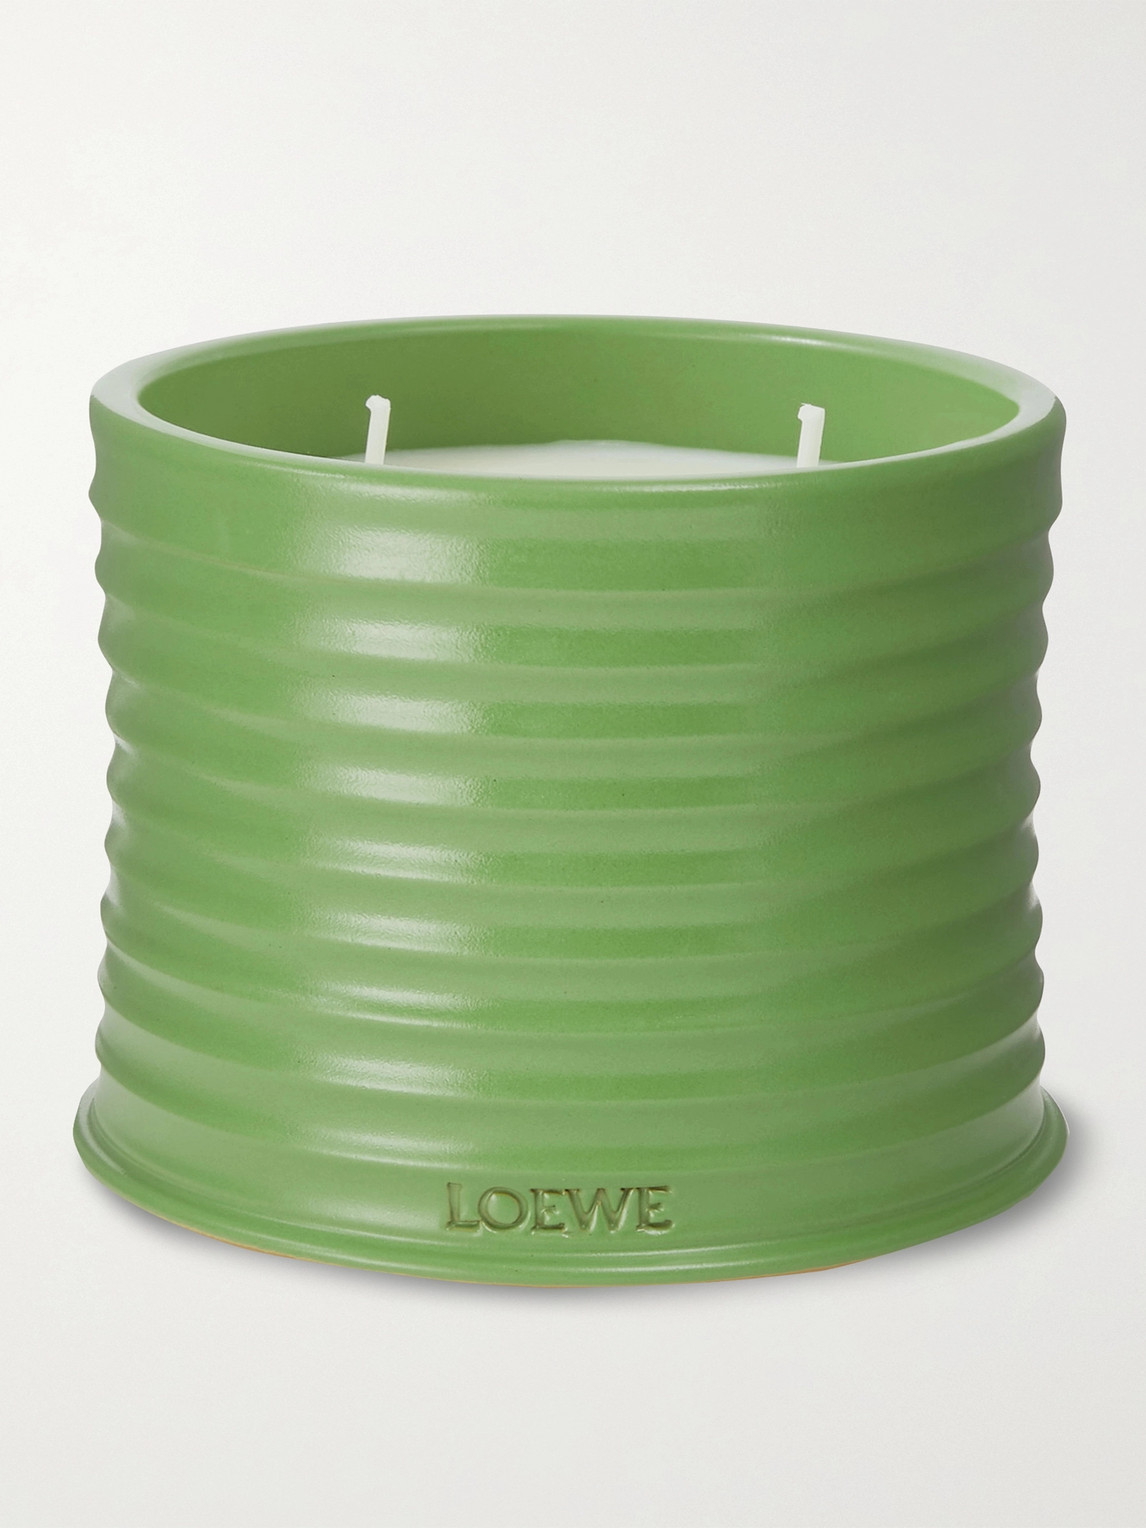 Loewe Luscious Pea Scented Candle, 610g In Colorless